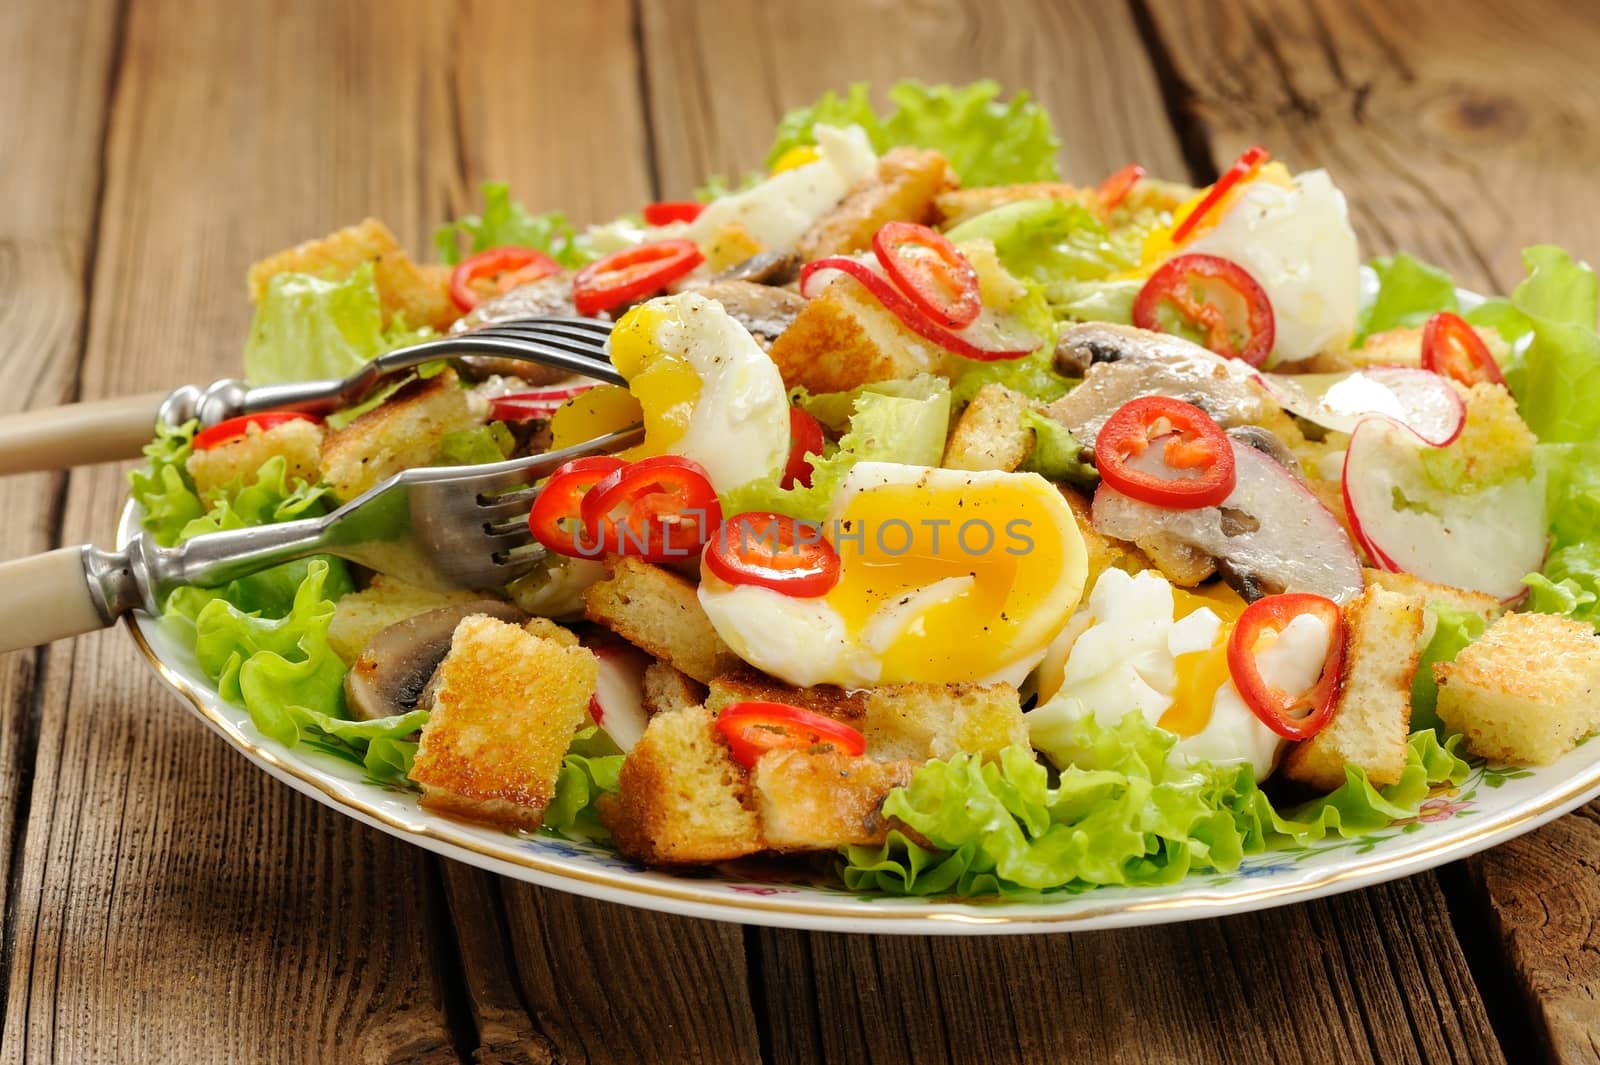 Salad Caesar with mushrooms, eggs, chili and radish with two forks on wooden background horizontal